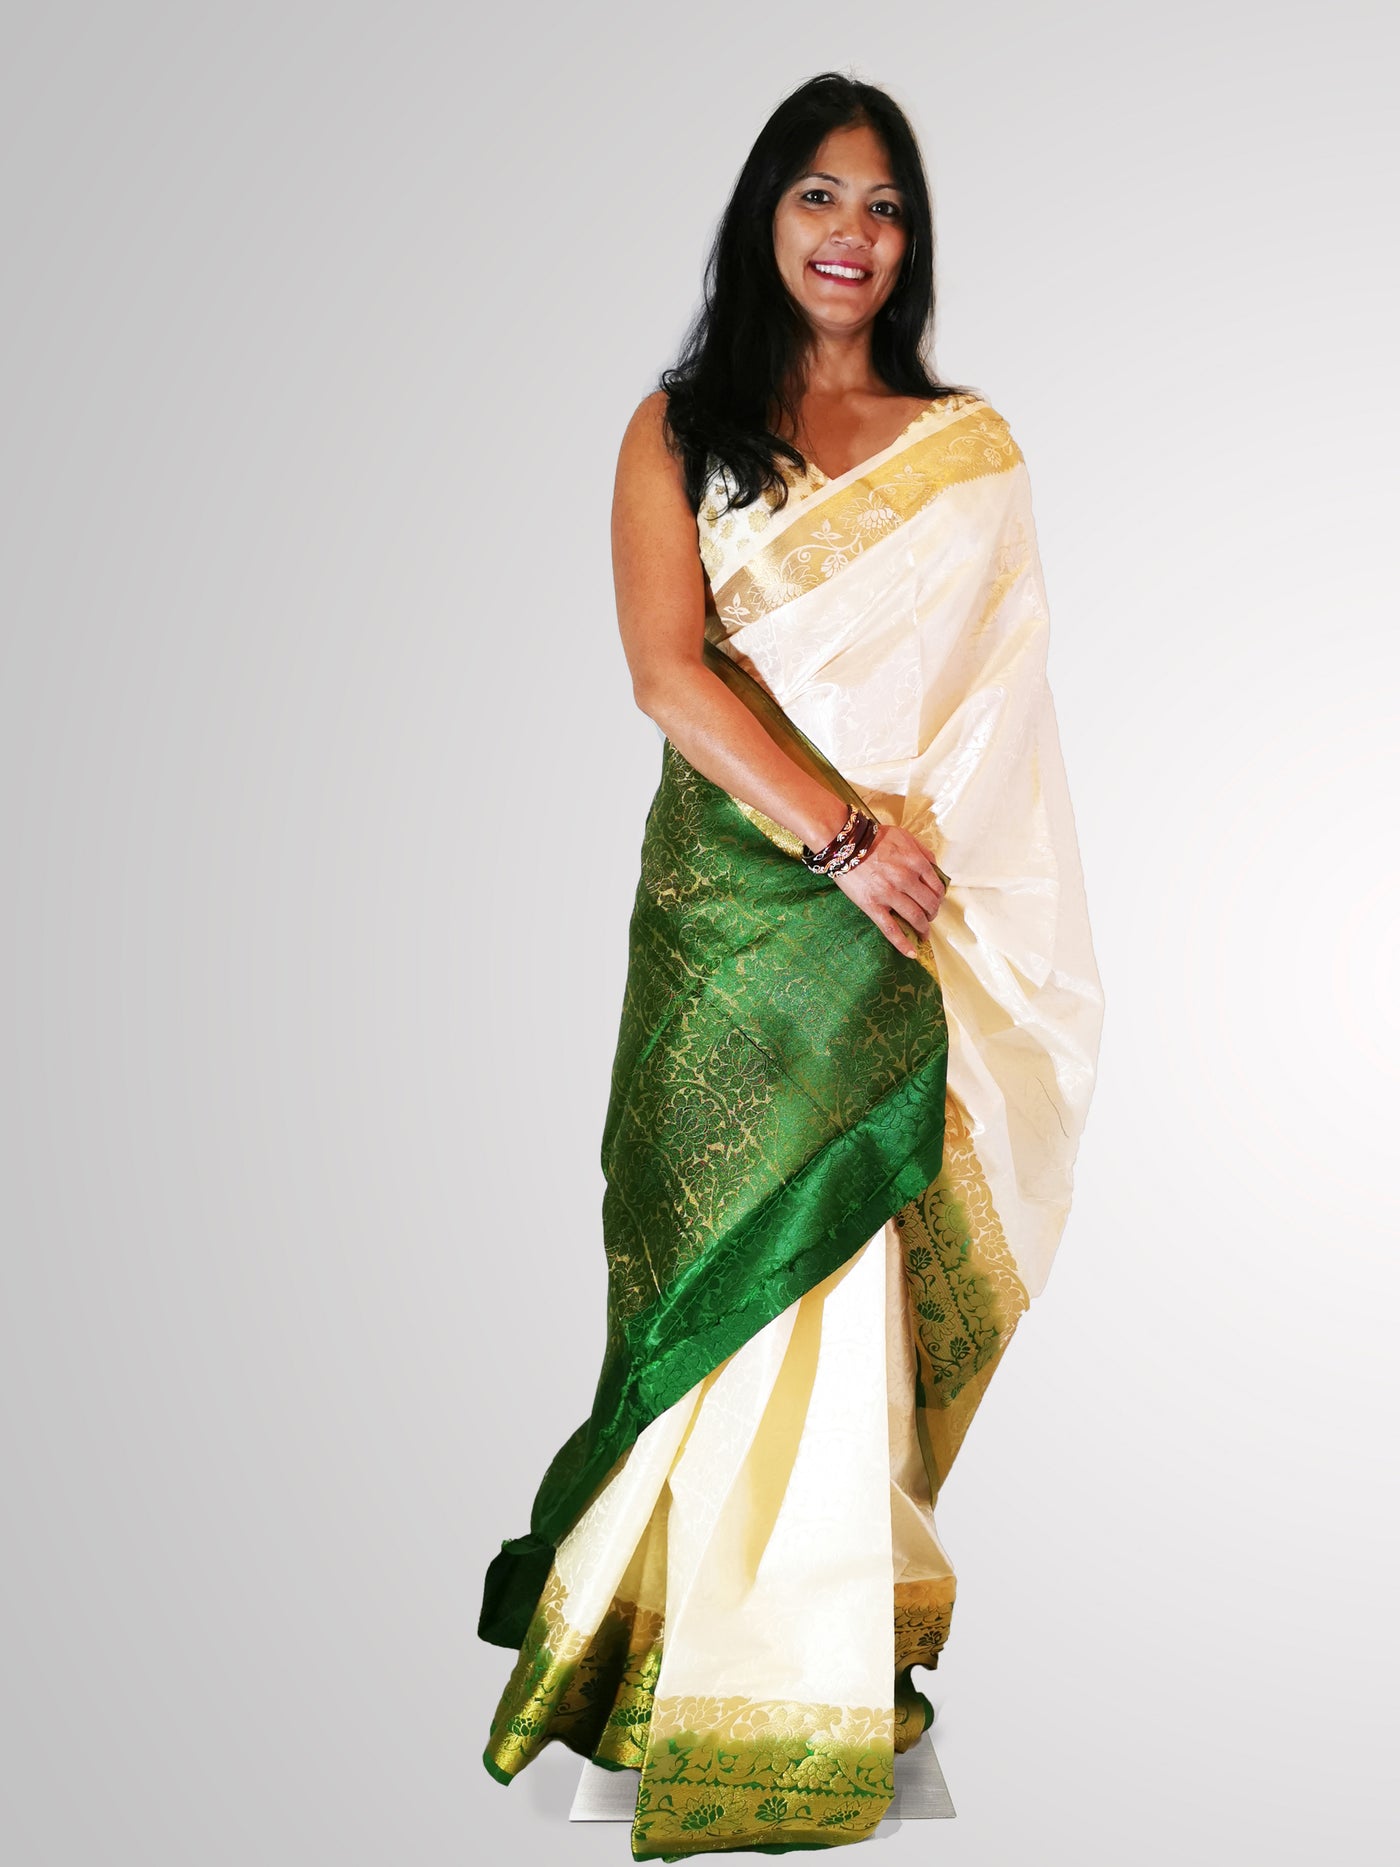 White Satin Silk Saree - Indian Clothing in Denver, CO, Aurora, CO, Boulder, CO, Fort Collins, CO, Colorado Springs, CO, Parker, CO, Highlands Ranch, CO, Cherry Creek, CO, Centennial, CO, and Longmont, CO. Nationwide shipping USA - India Fashion X